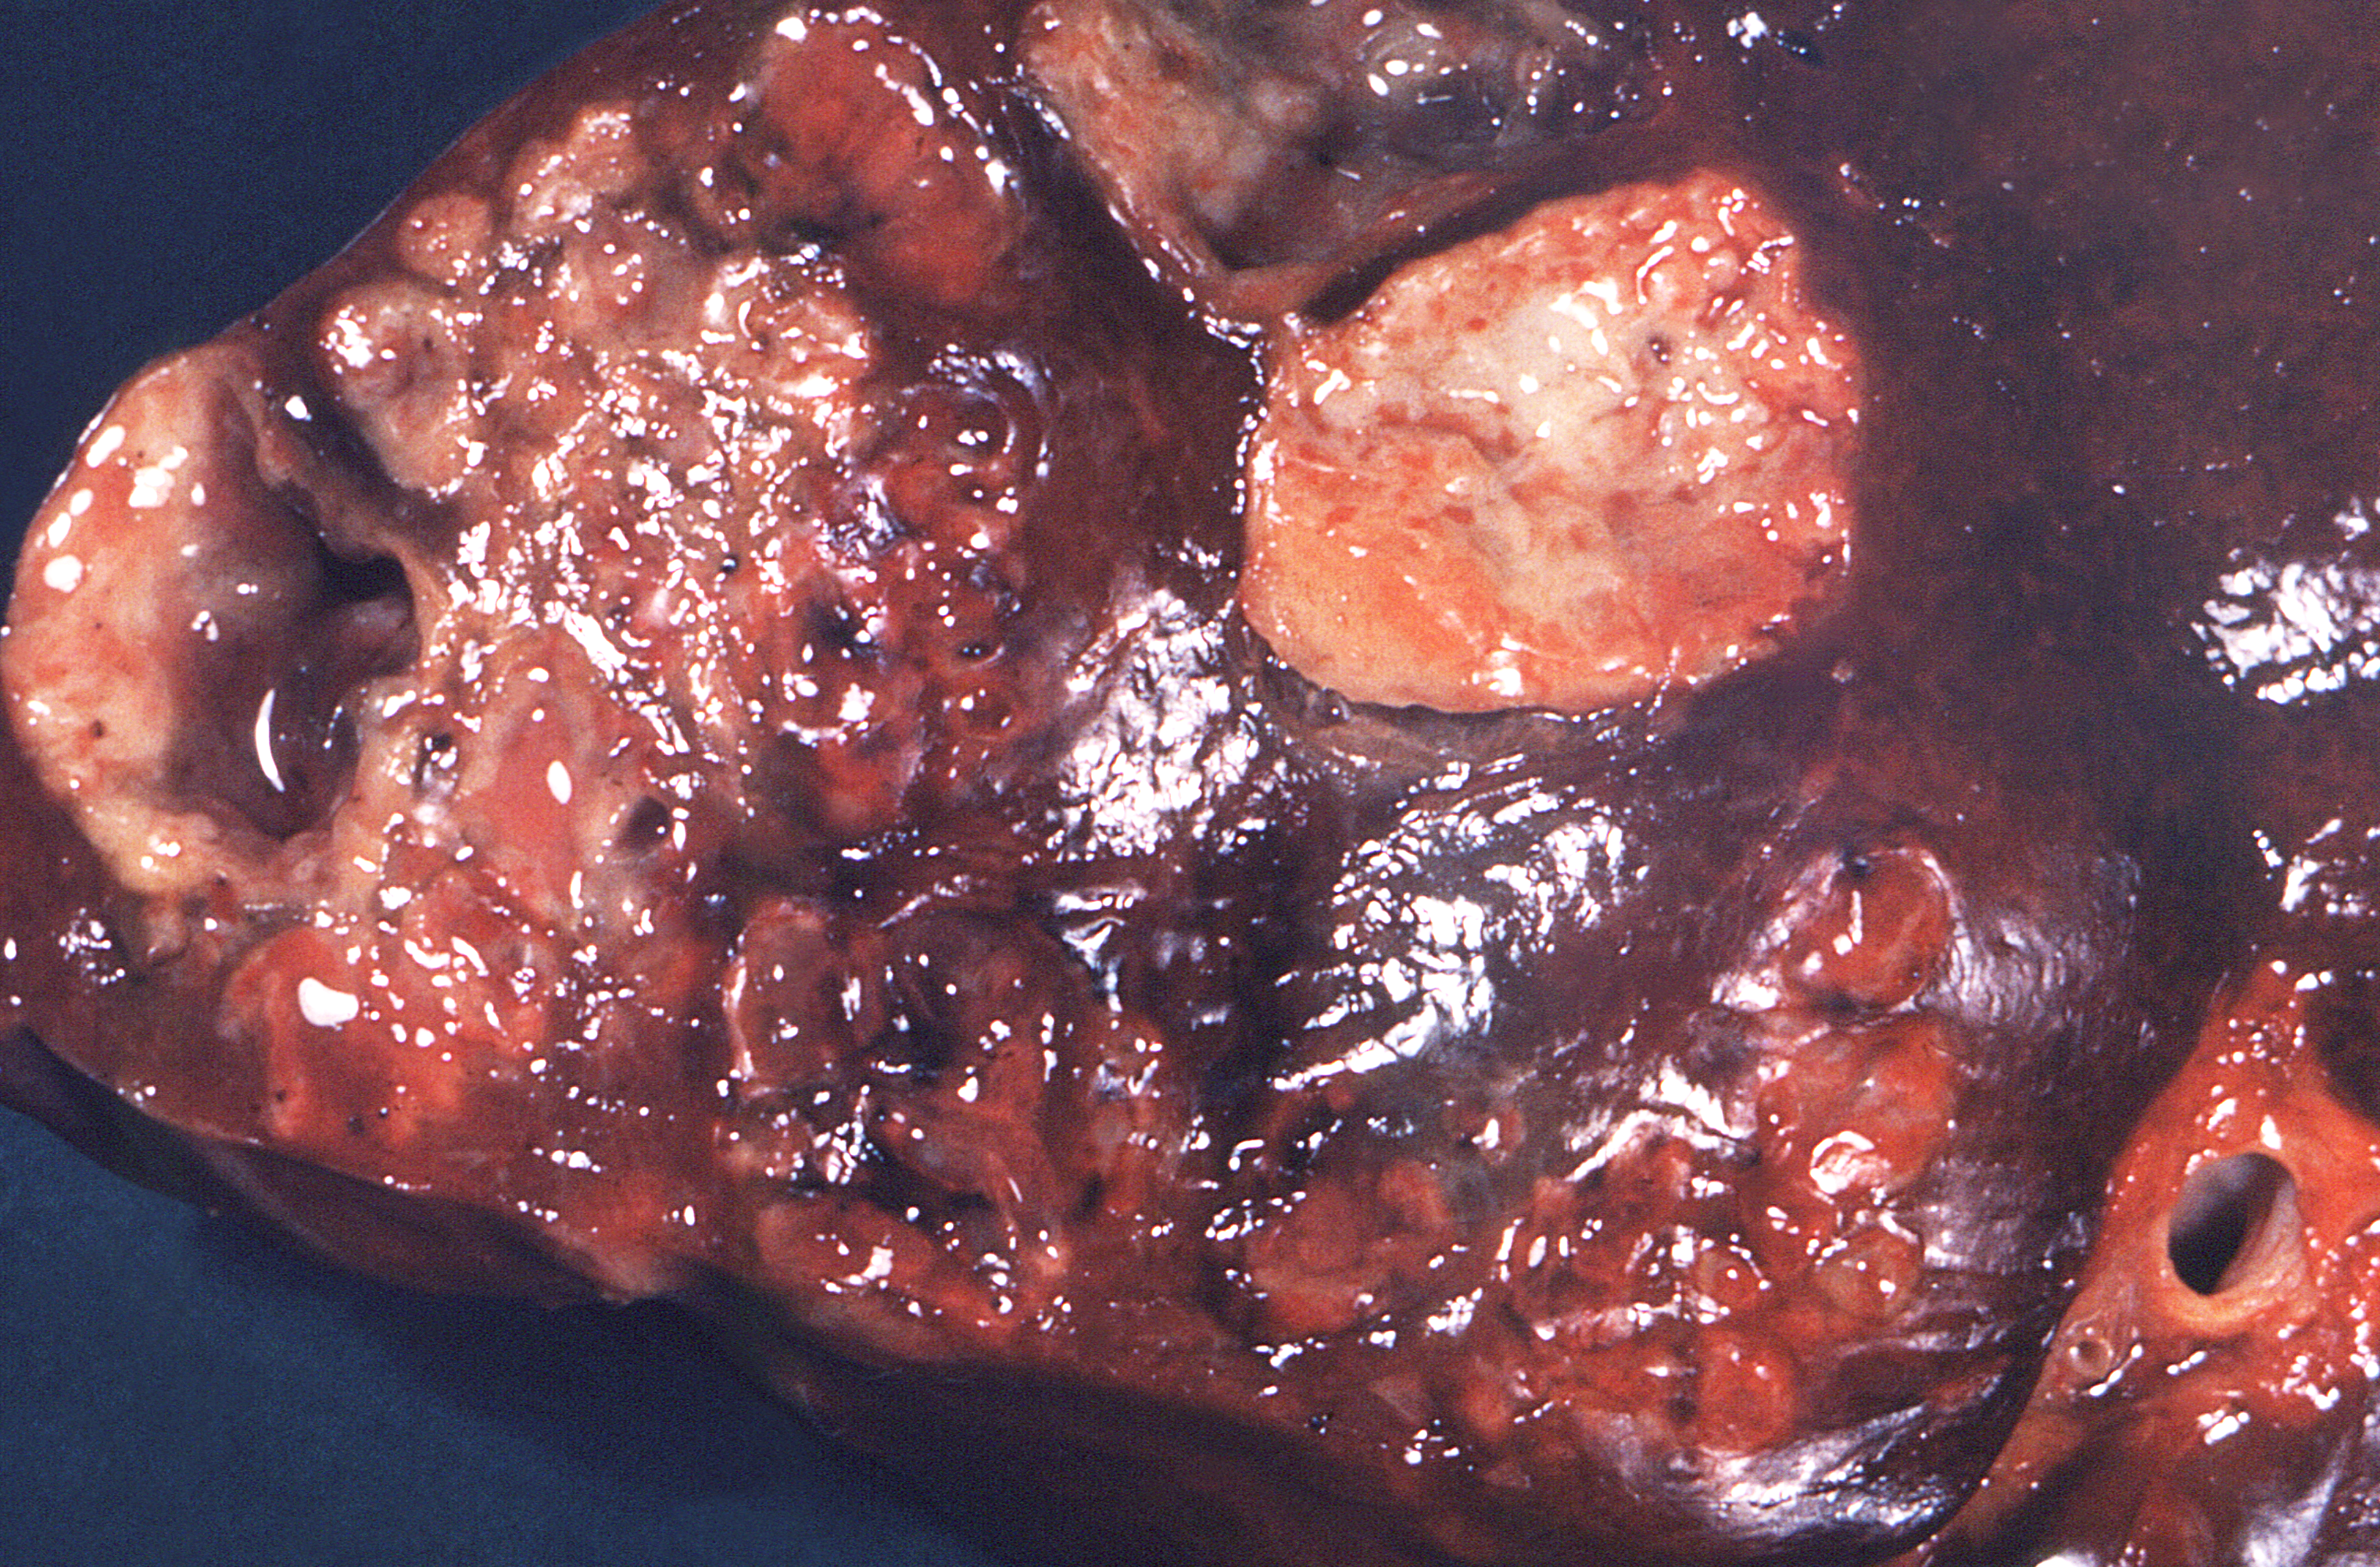 This cut section of human liver, revealed the presence of numerous suppurative, or pus containing lesions due to an infection known as actinomycosis, caused by the Gram-positive, fungus-like, aerobic bacteria of the order Actinomycetales